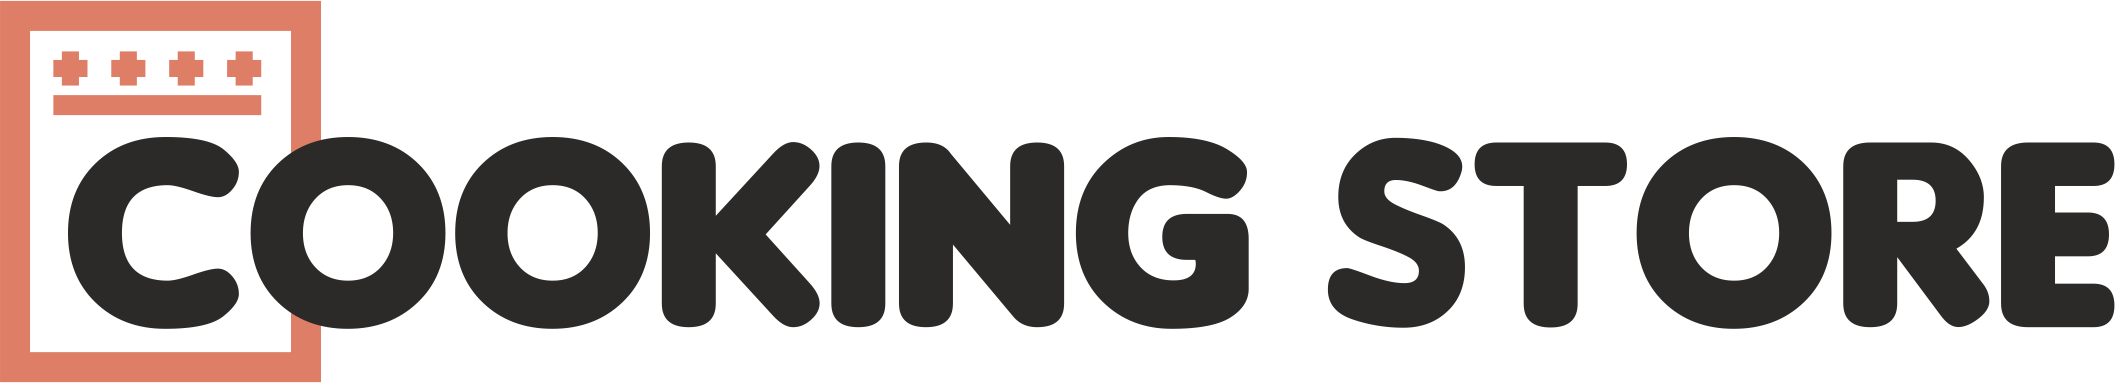 Cooking Store Logo